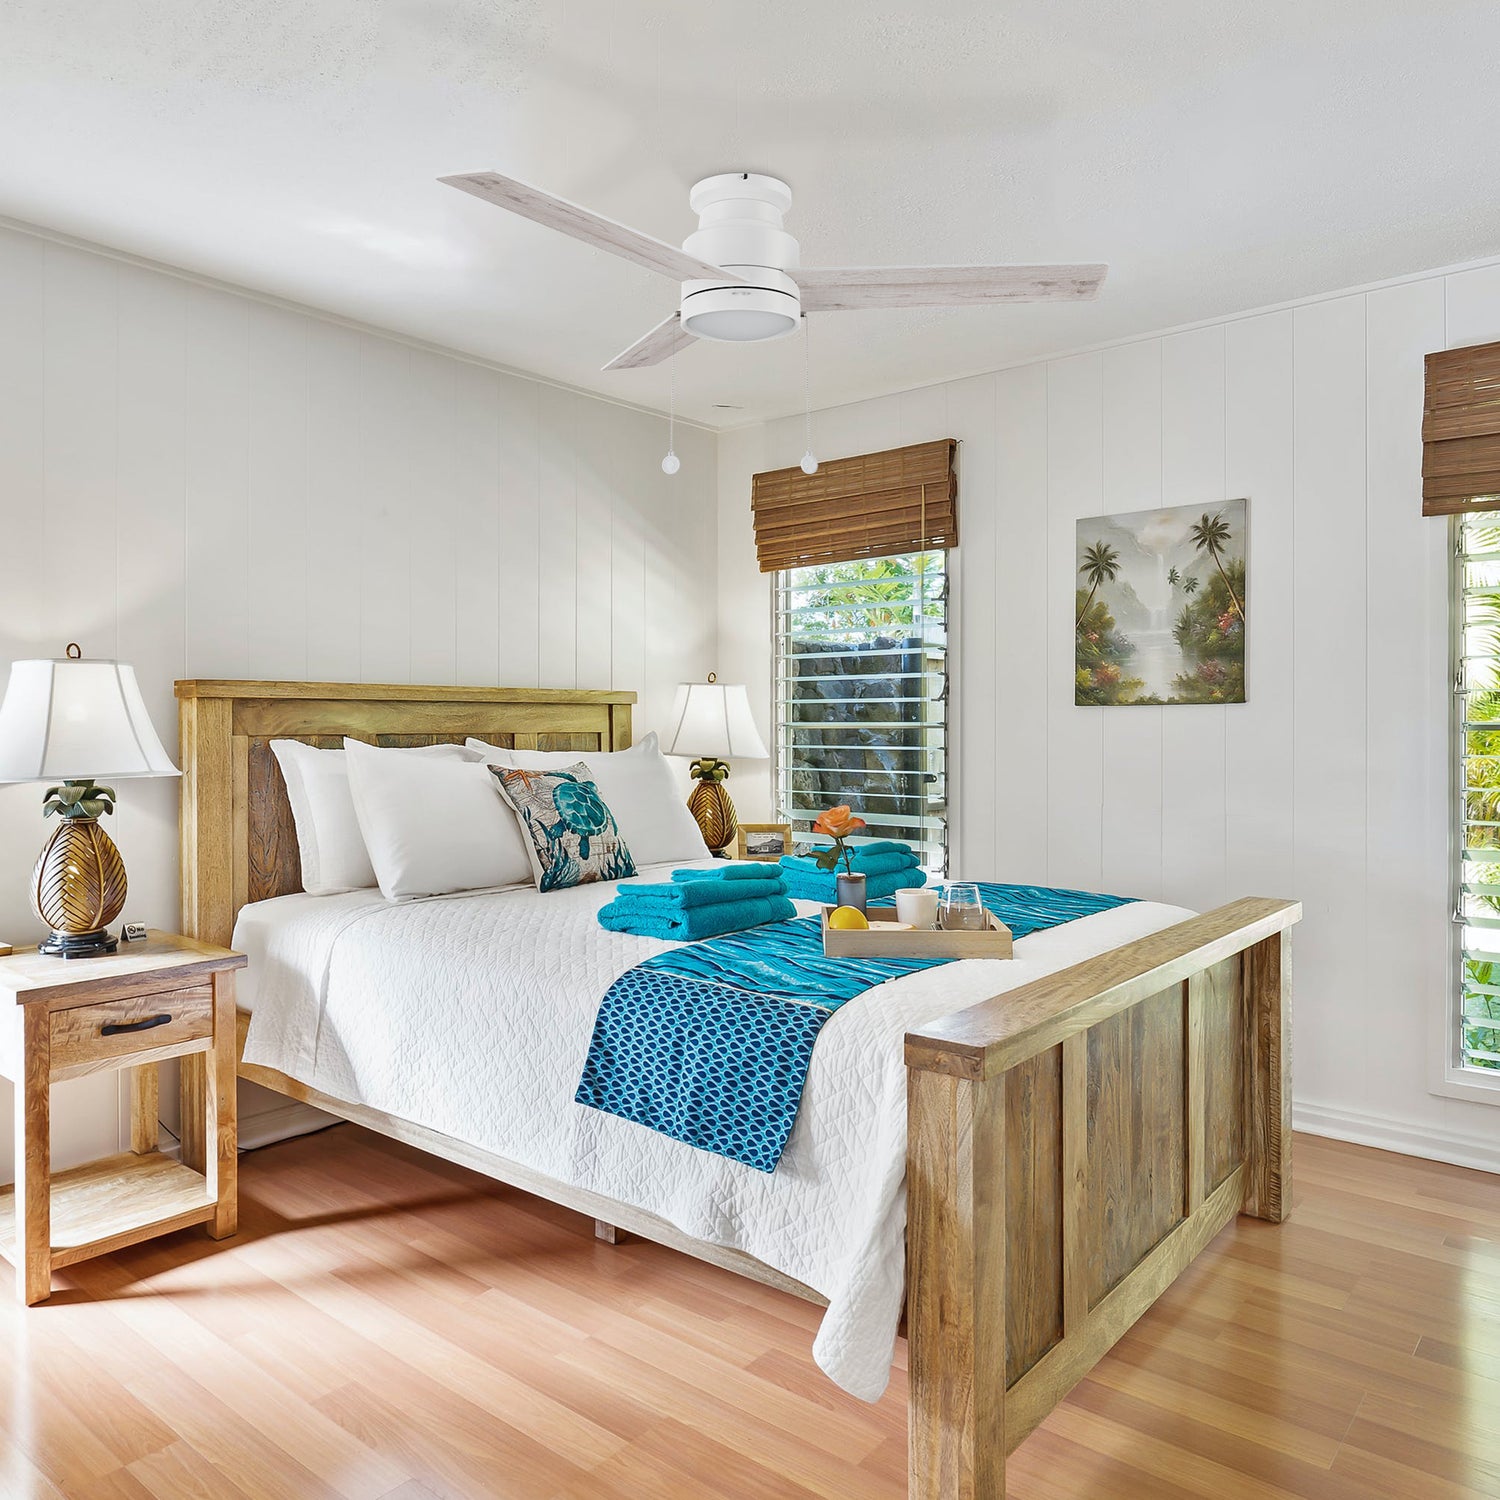 52inch low-profile ceiling fan with dimmable led light and light-color wooden pattern blades, matching with wood grain single bed, vintage lamp and bamboo curtain, make the whole bedroom very natural atmosphere. 